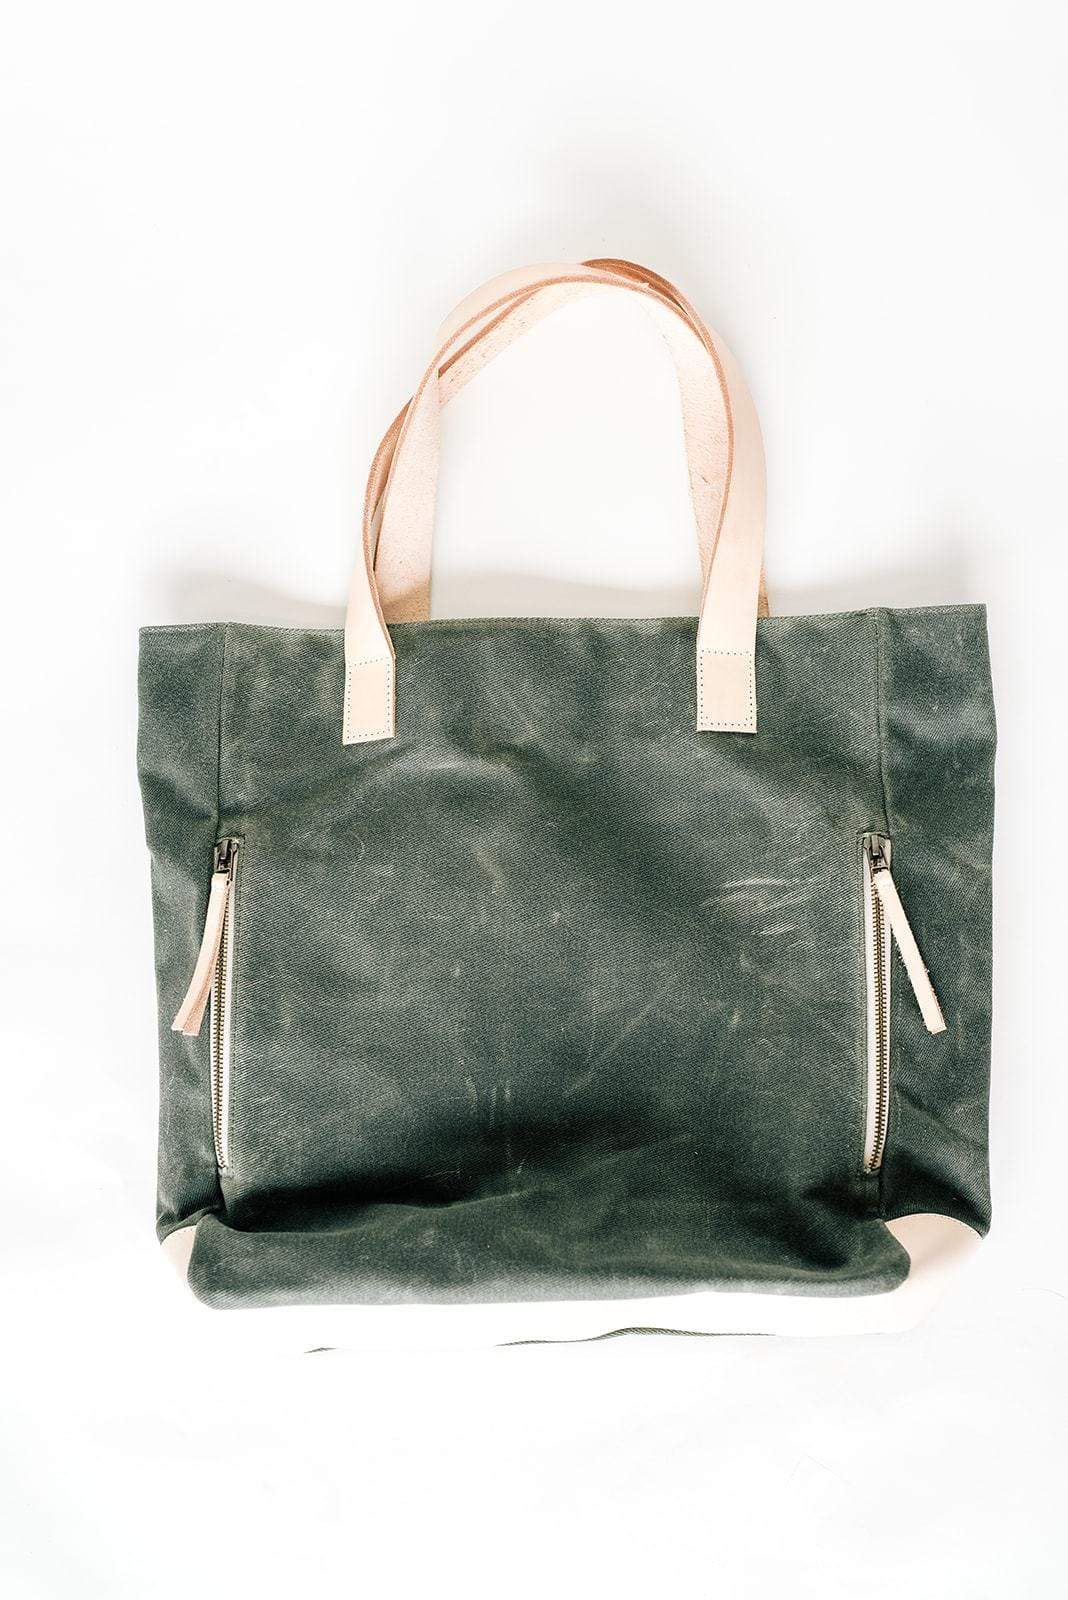 The Classic Tote - Waxed Olive, Gustin